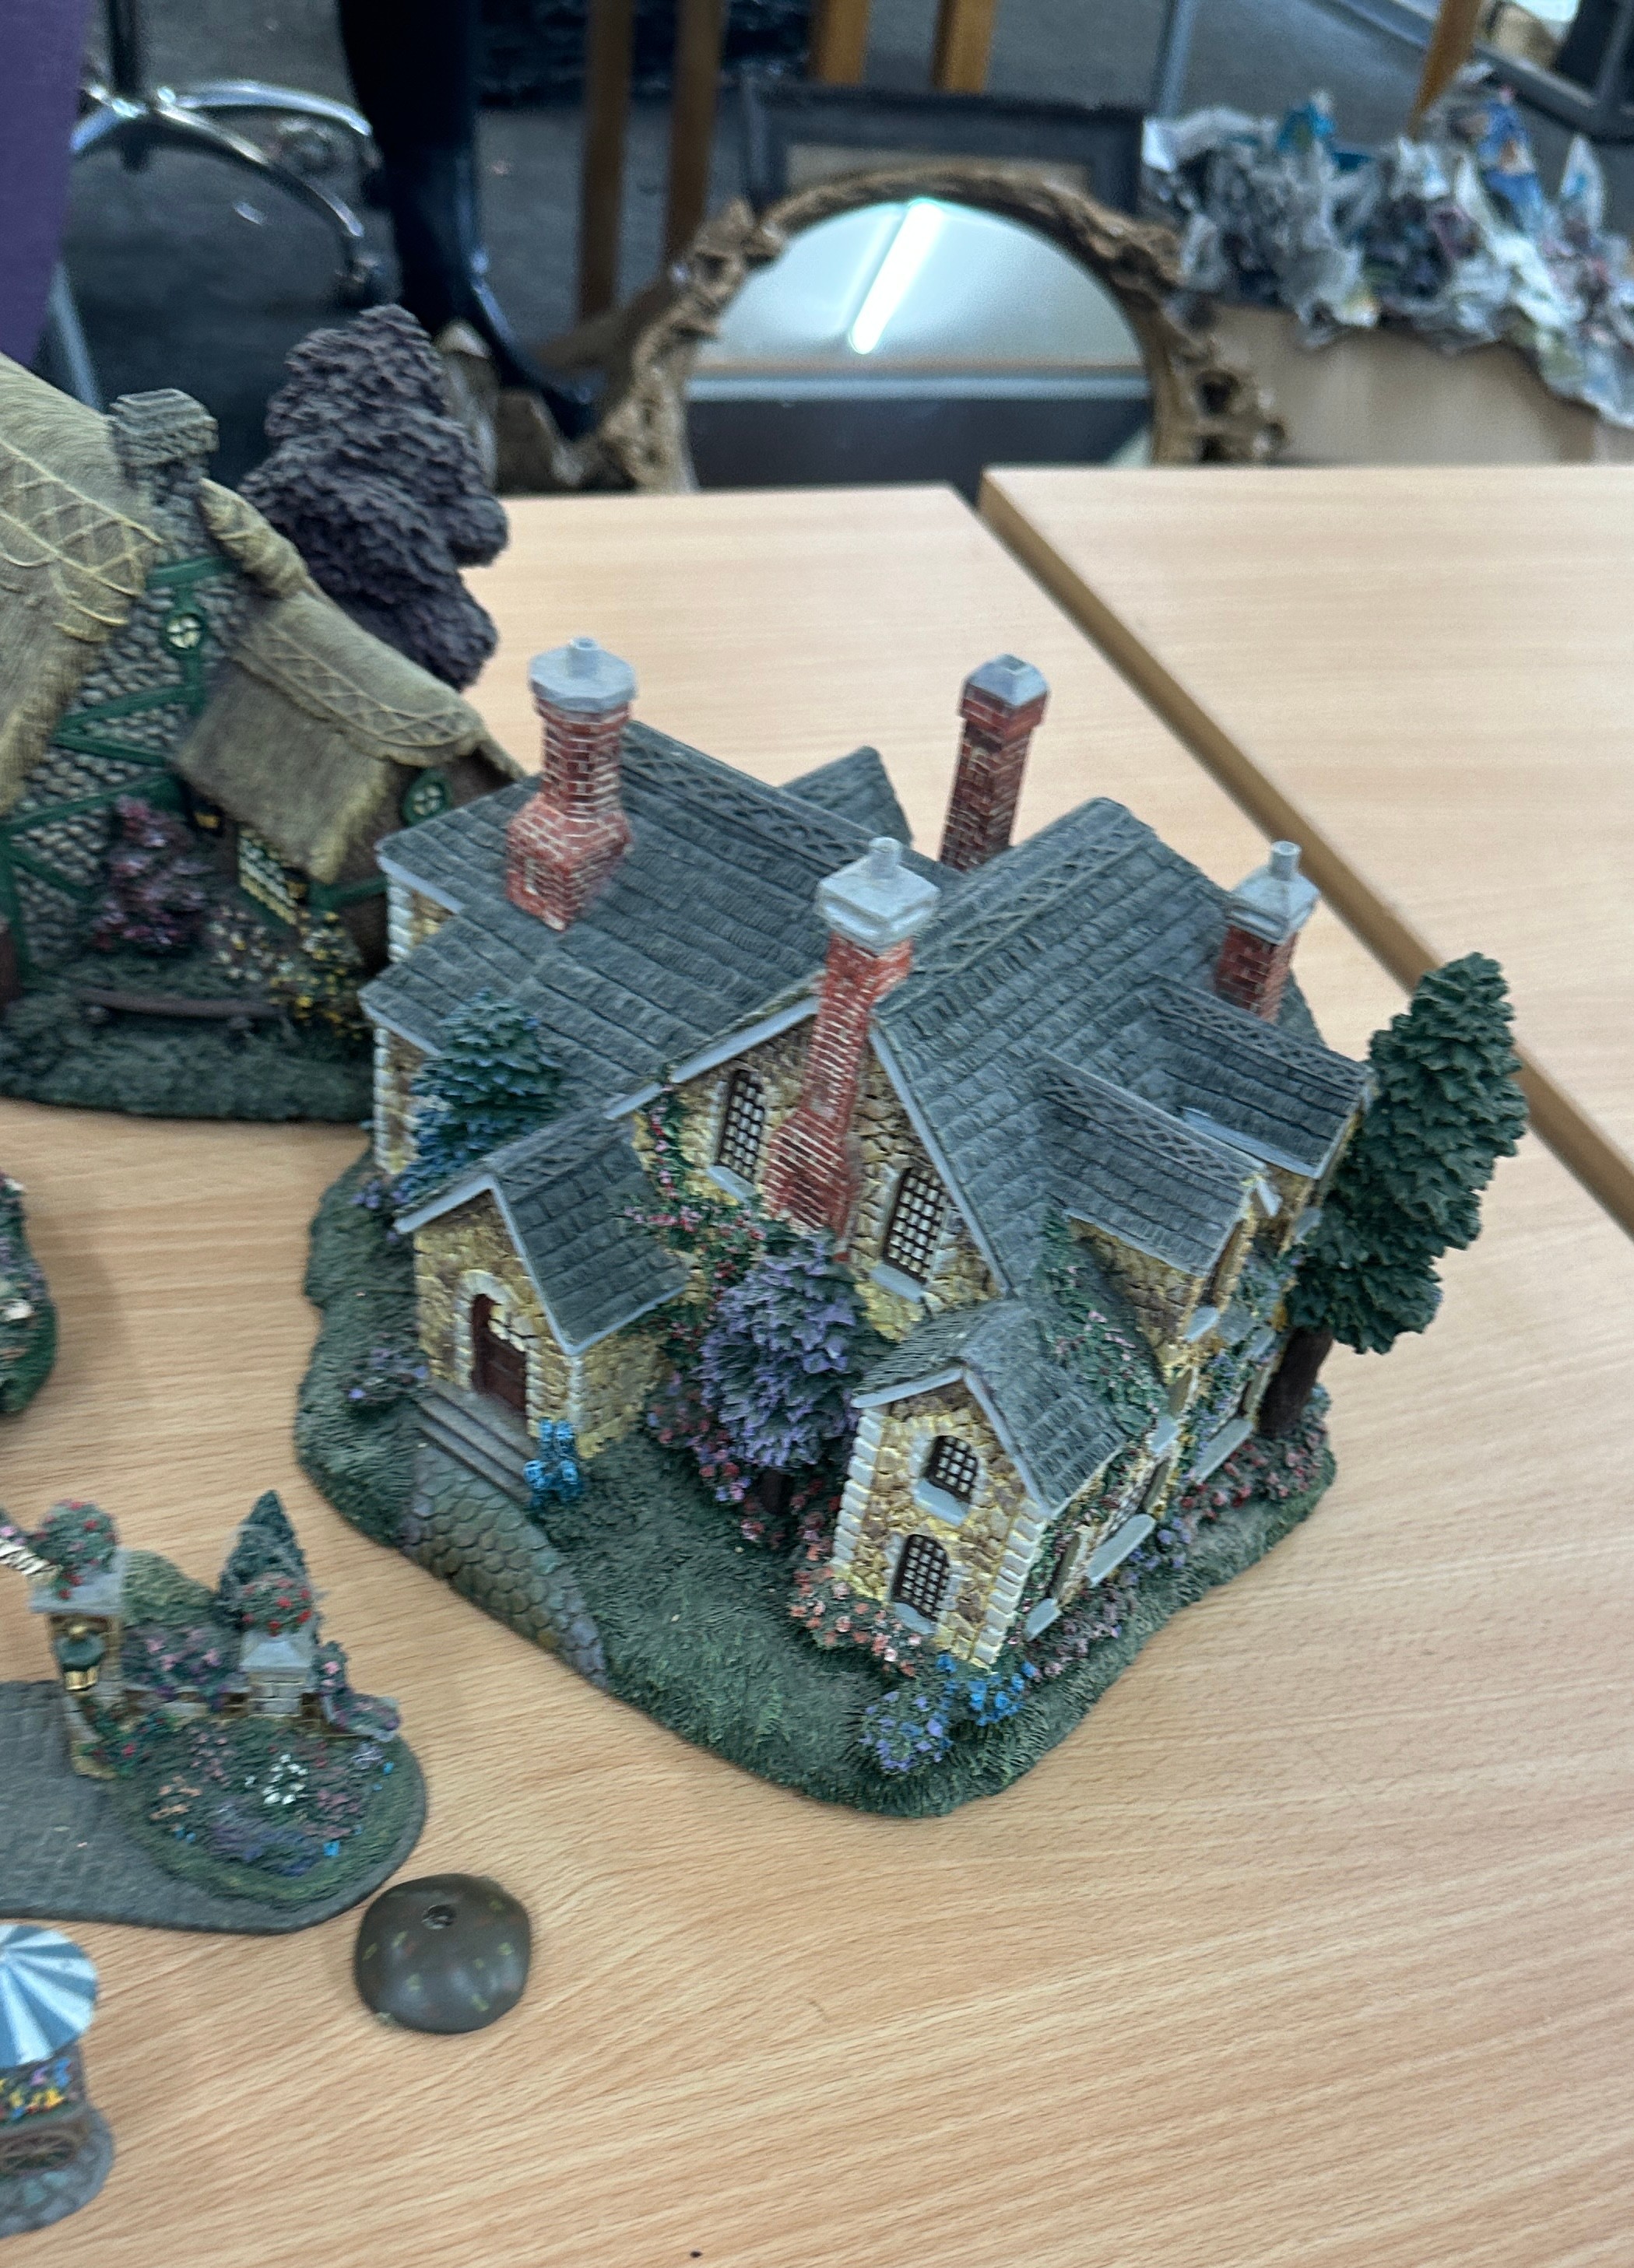 Selection of Hawthorne village figures includes Stone broke inn, pastry shop etc - Image 5 of 6